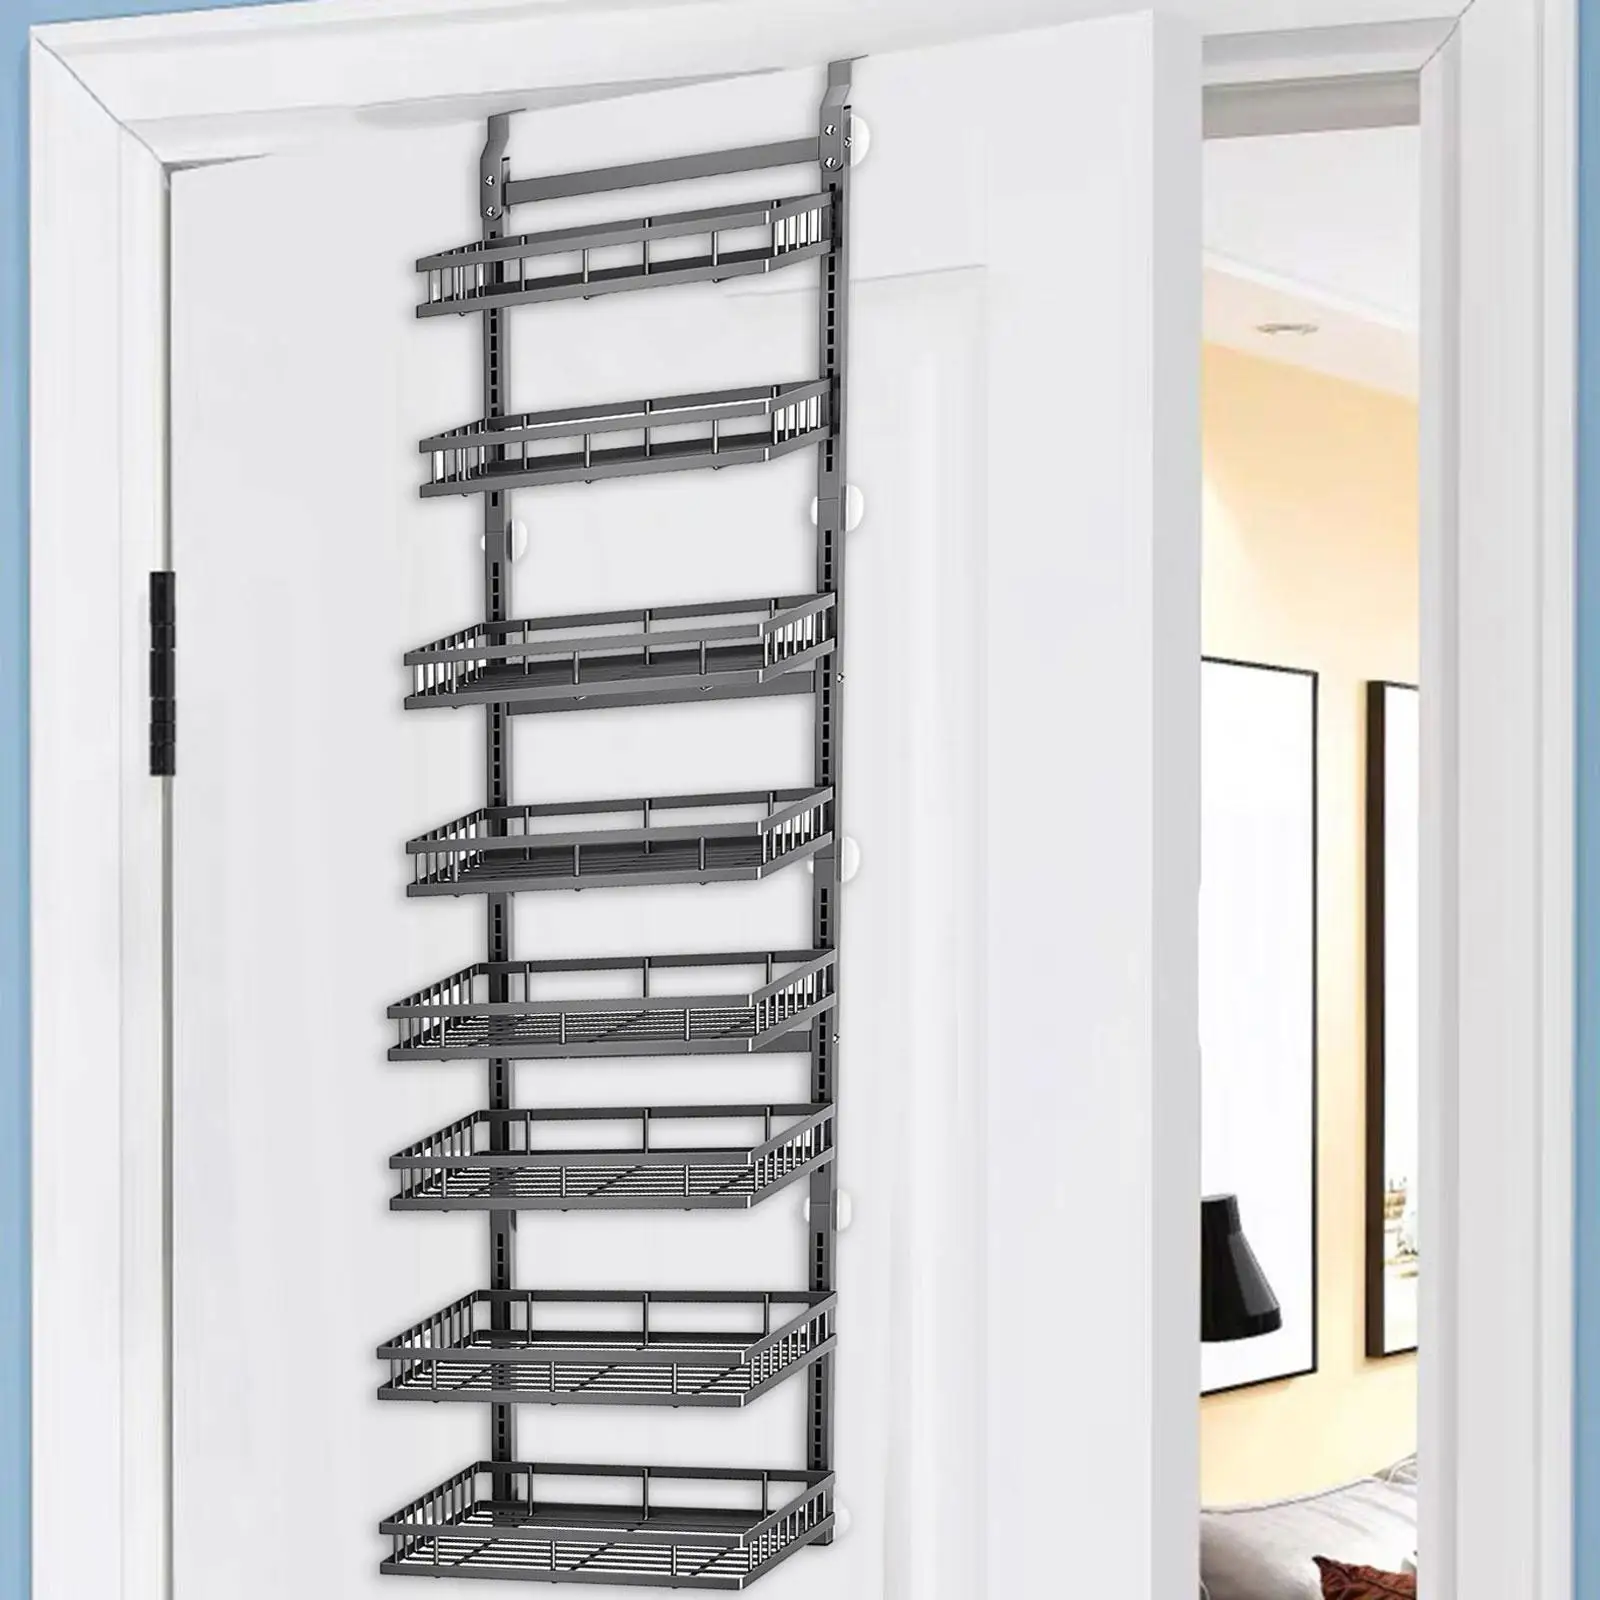 

8 Tier over The Door Pantry Organizer Narrow Sturdy for Kitchen Bedroom Home